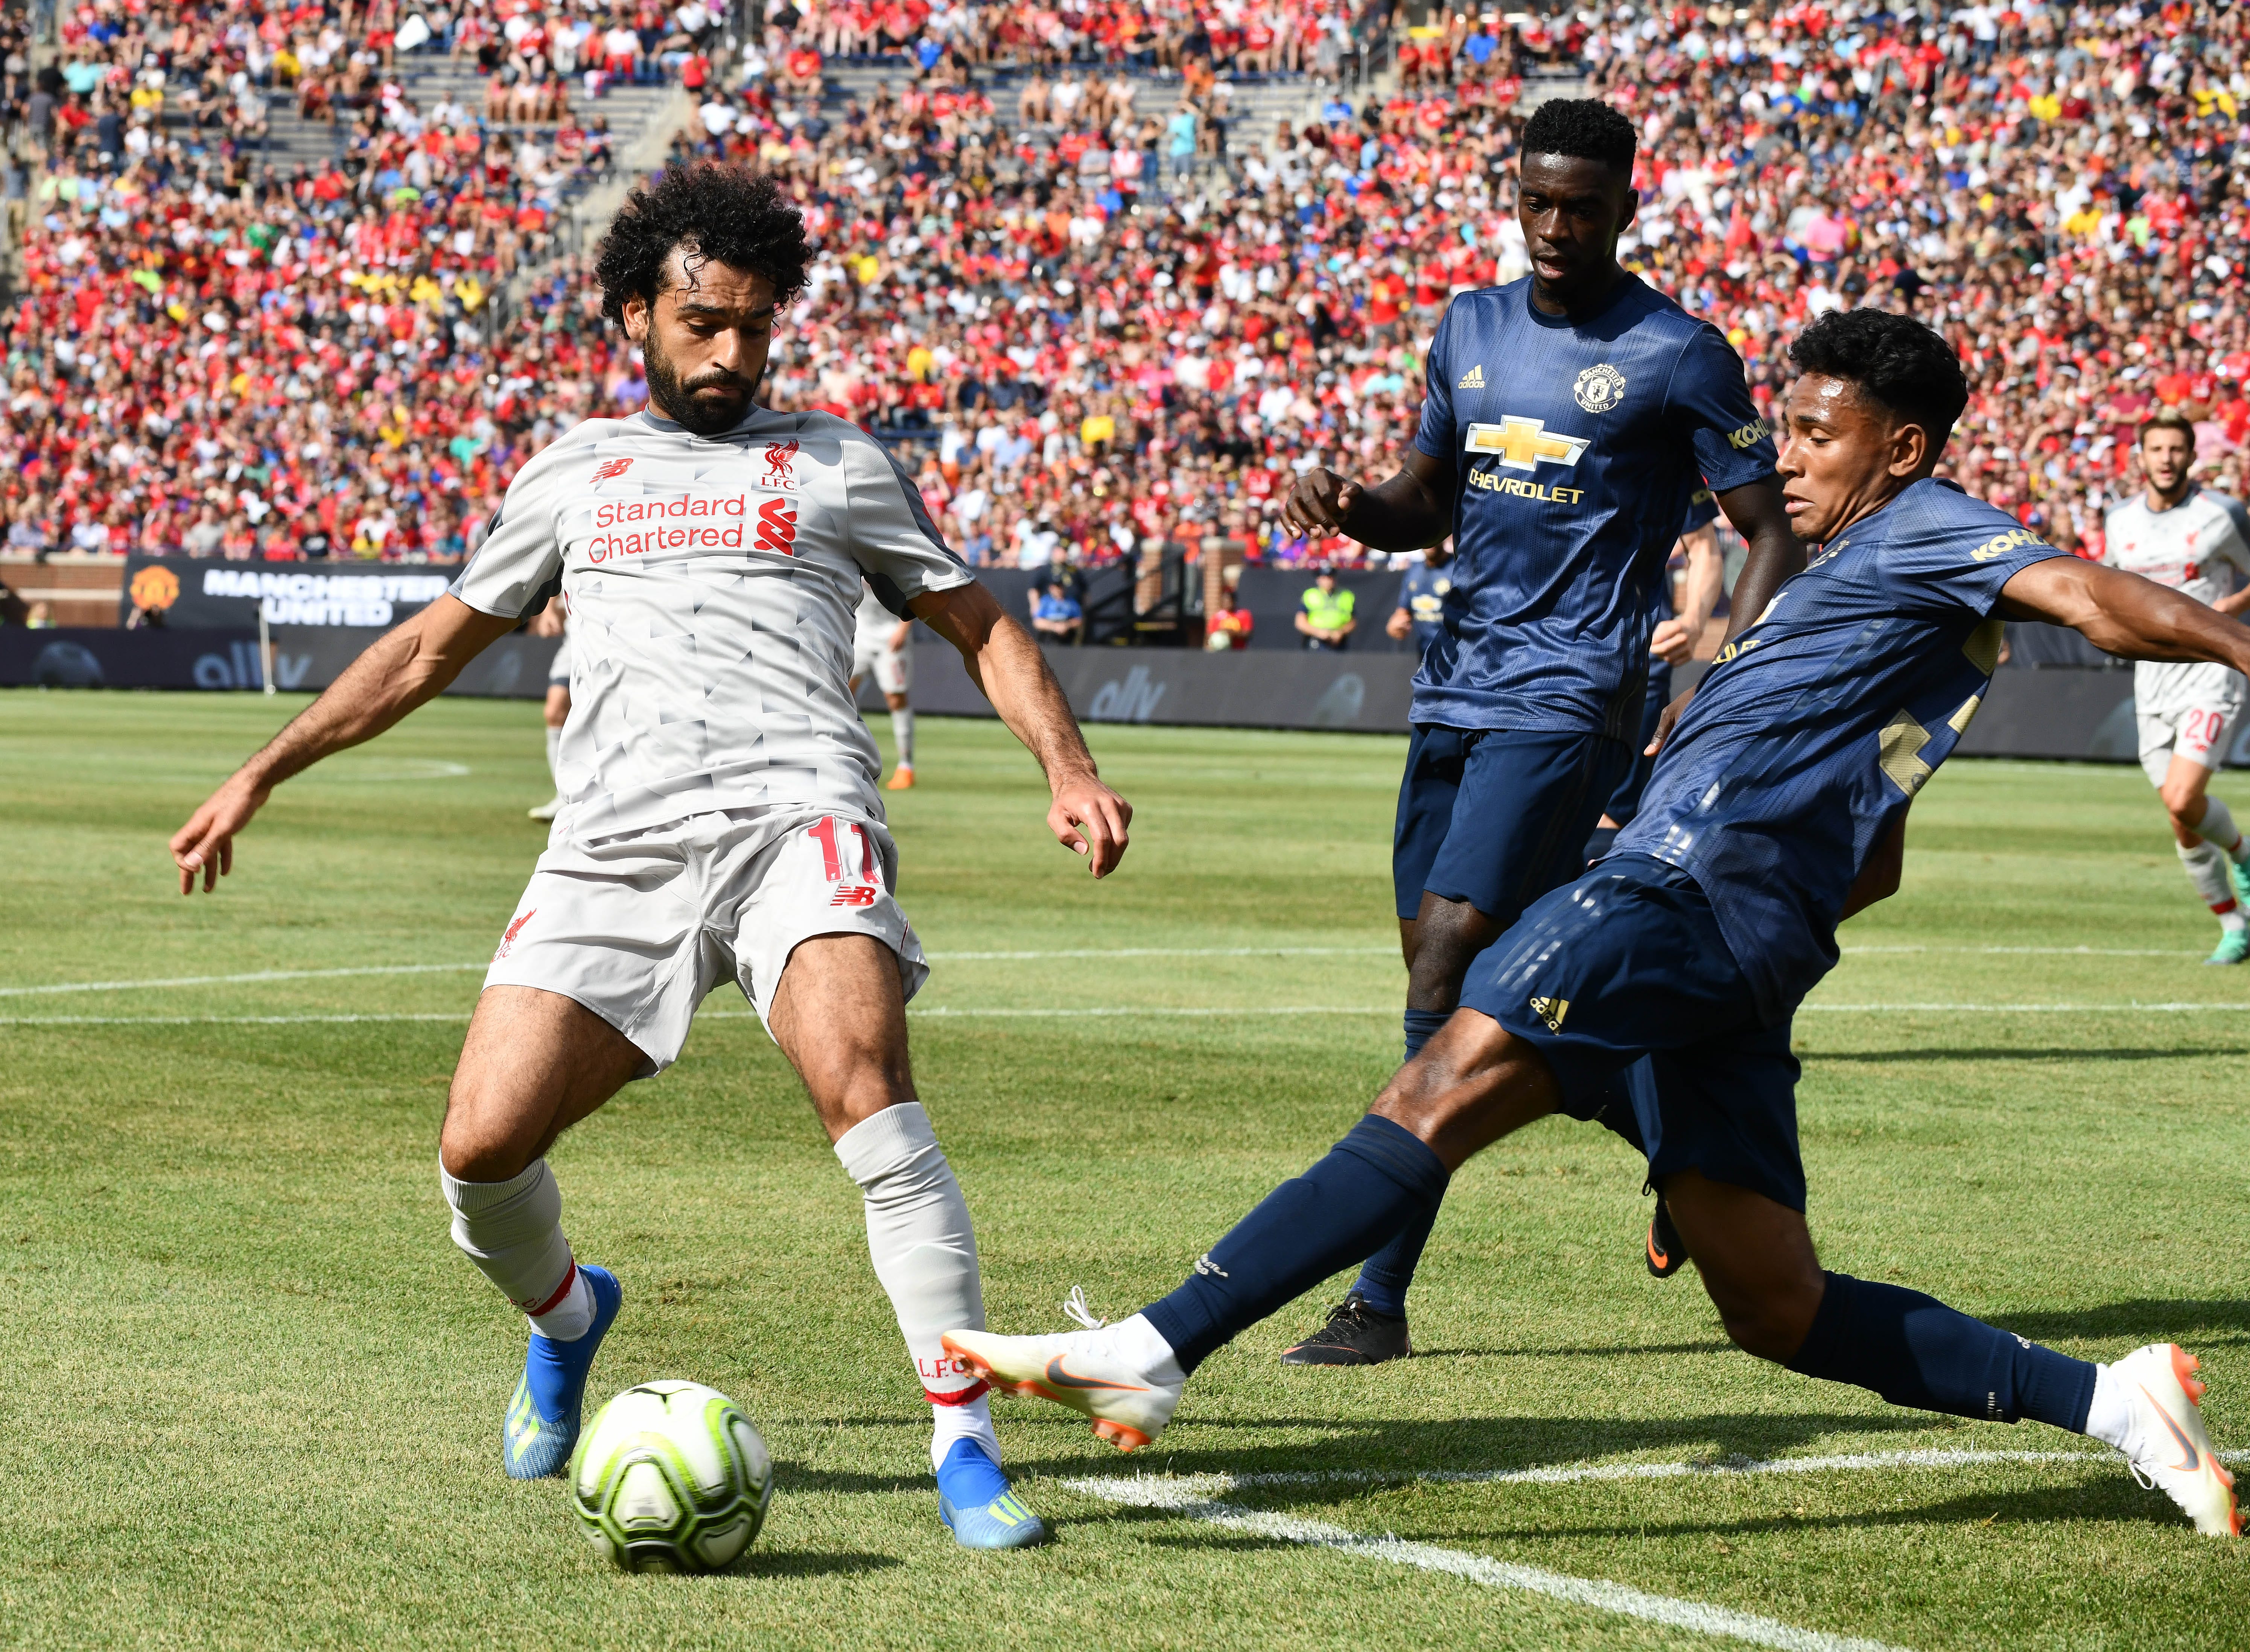 Liverpool's Mohamed Salah chases down a loose ball in front of Manchester United's net with Demetri Mitchell defending in the first half.